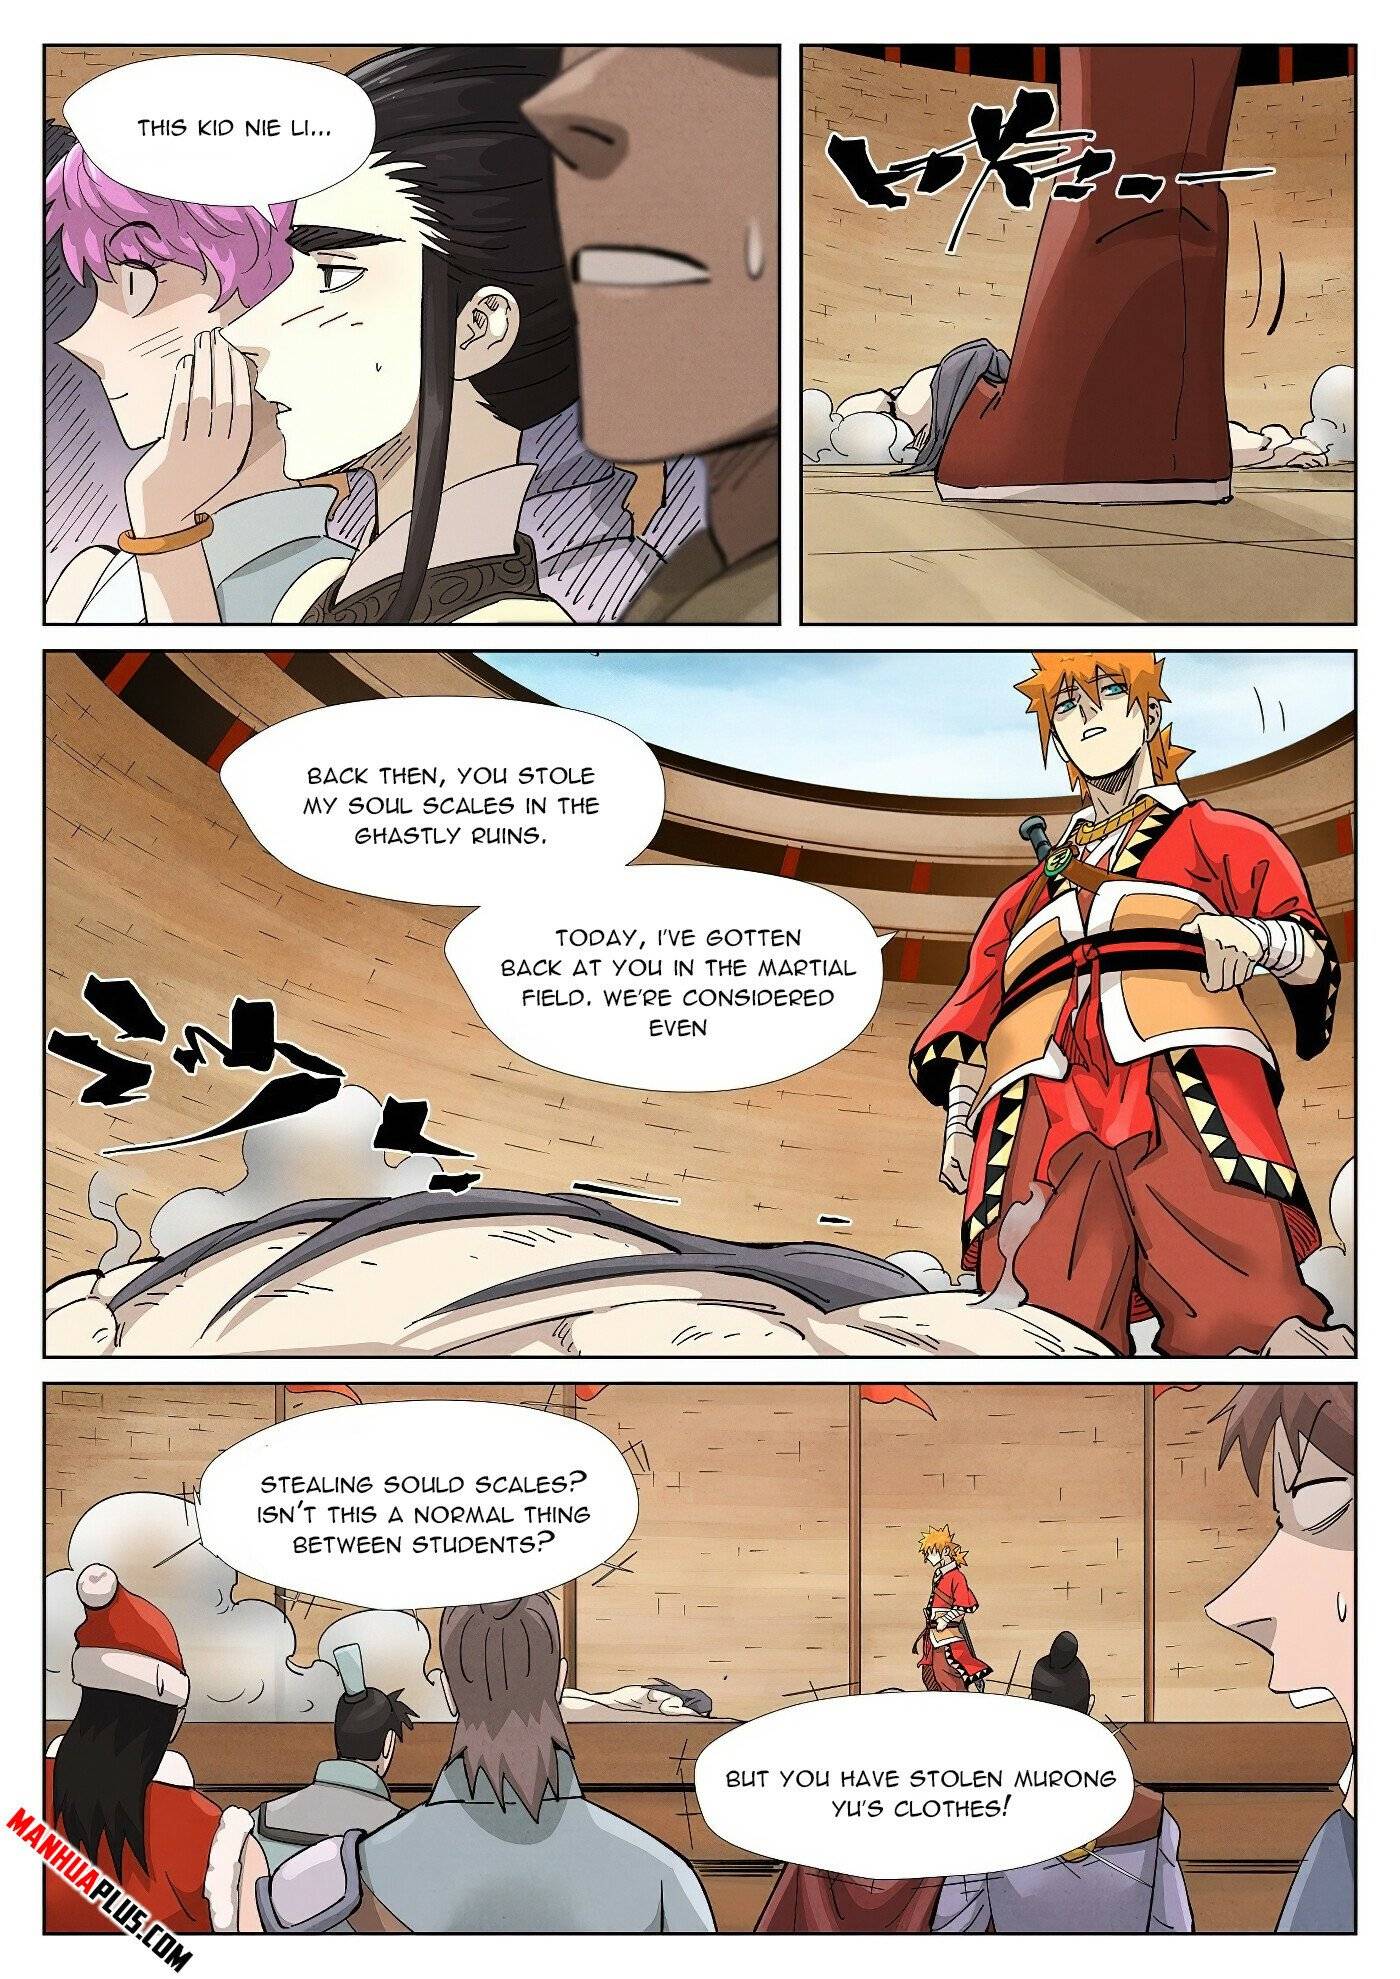 Tales of Demons and Gods Manhua Chapter 370.5 - Page 7